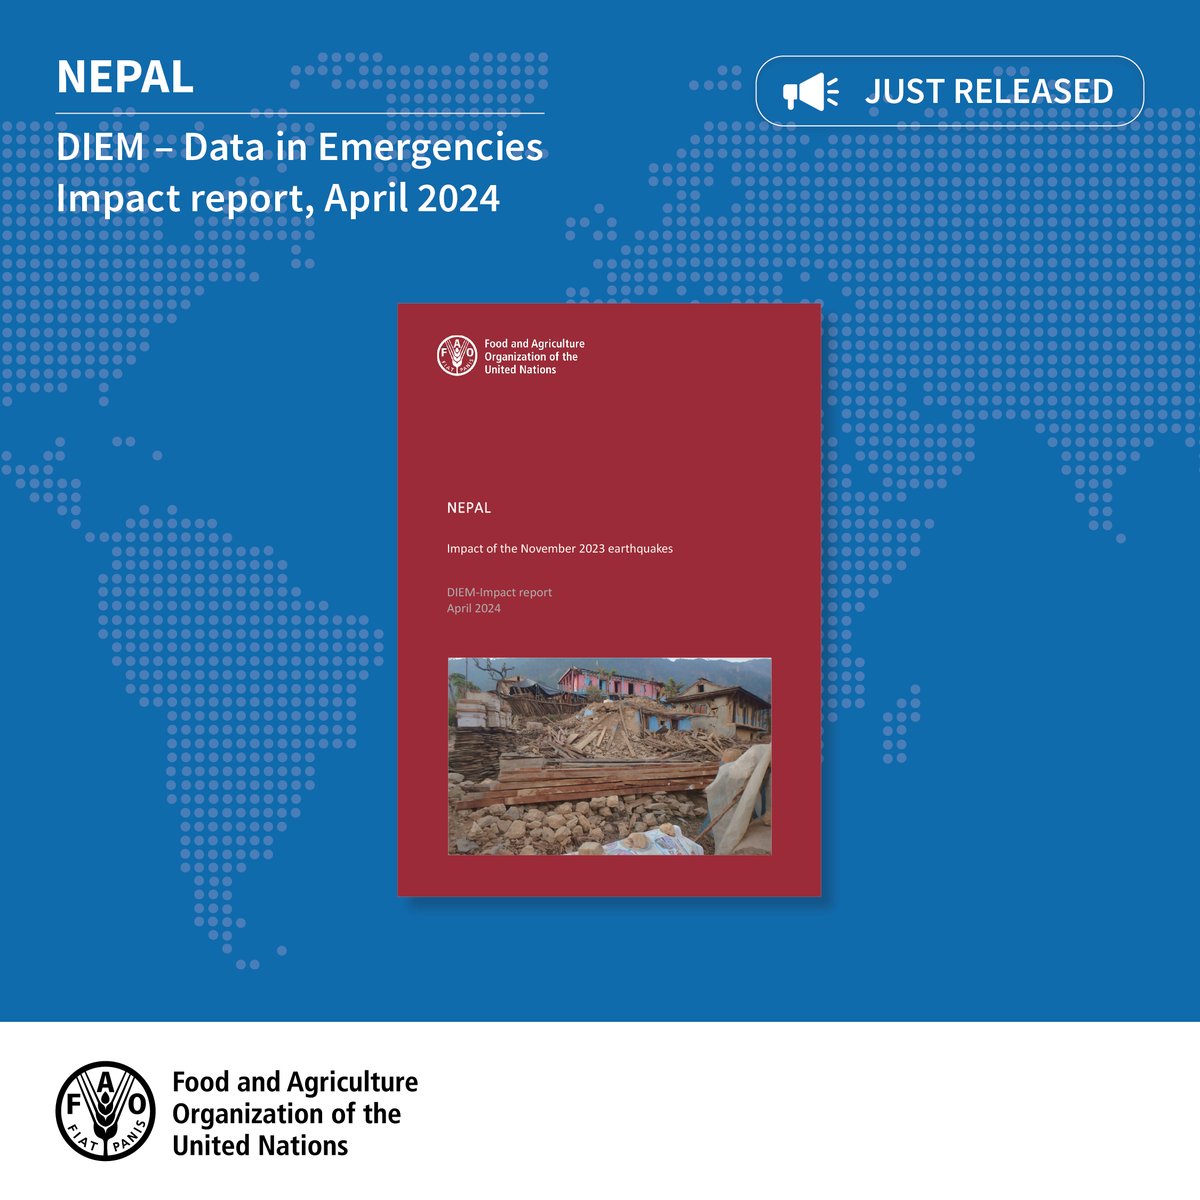 The new #DataInEmergencies Impact report identified the loss of productive farming assets as the most critical issue following the November 2023 earthquakes in Nepal's Karnali province. Read more 👉 bit.ly/3yaLkYx